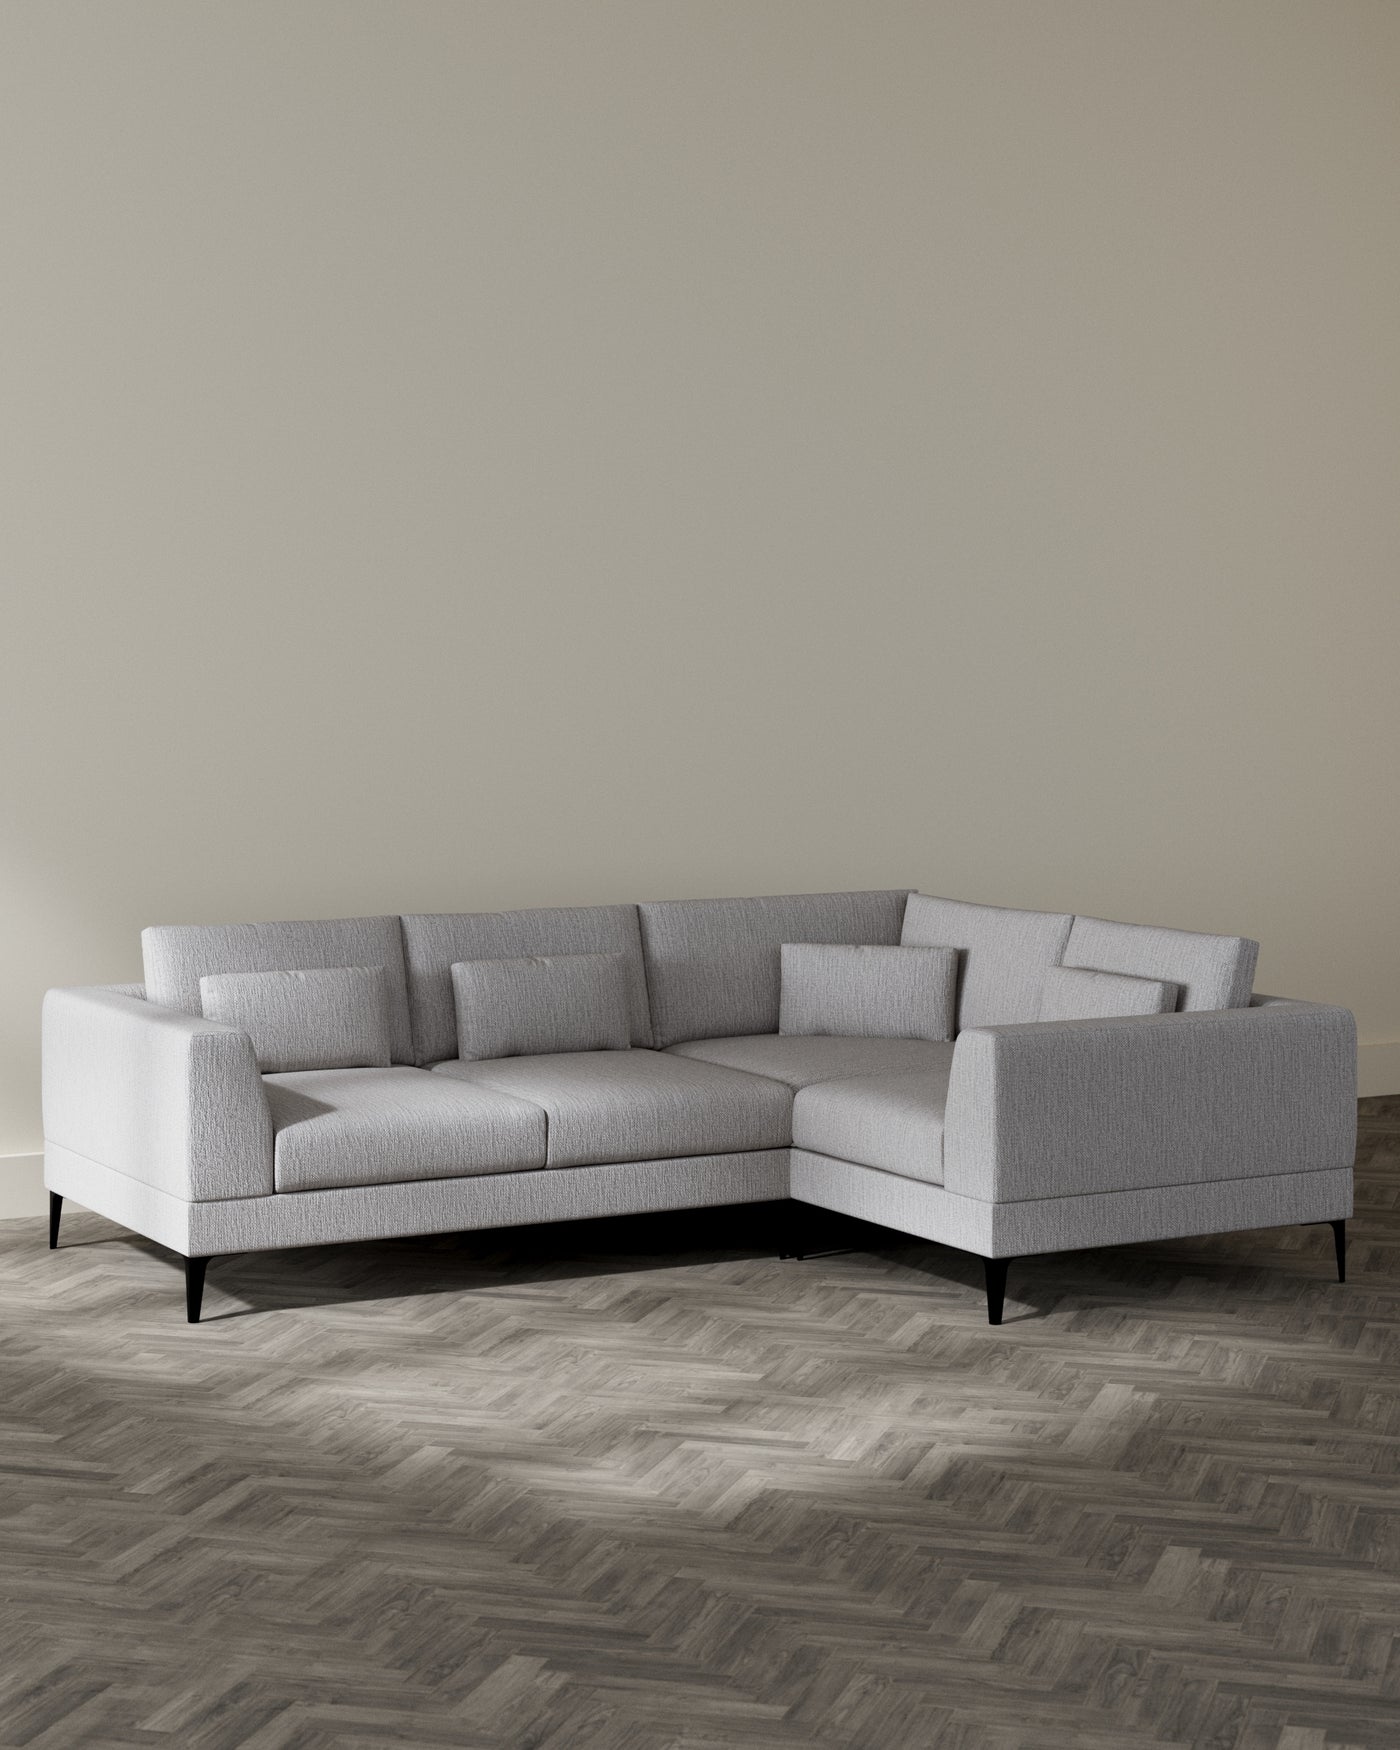 A modern light grey sectional sofa with clean lines, featuring a left-facing chaise lounge, cushions, and slim, dark wooden legs, set in a minimalist room with herringbone parquet flooring.